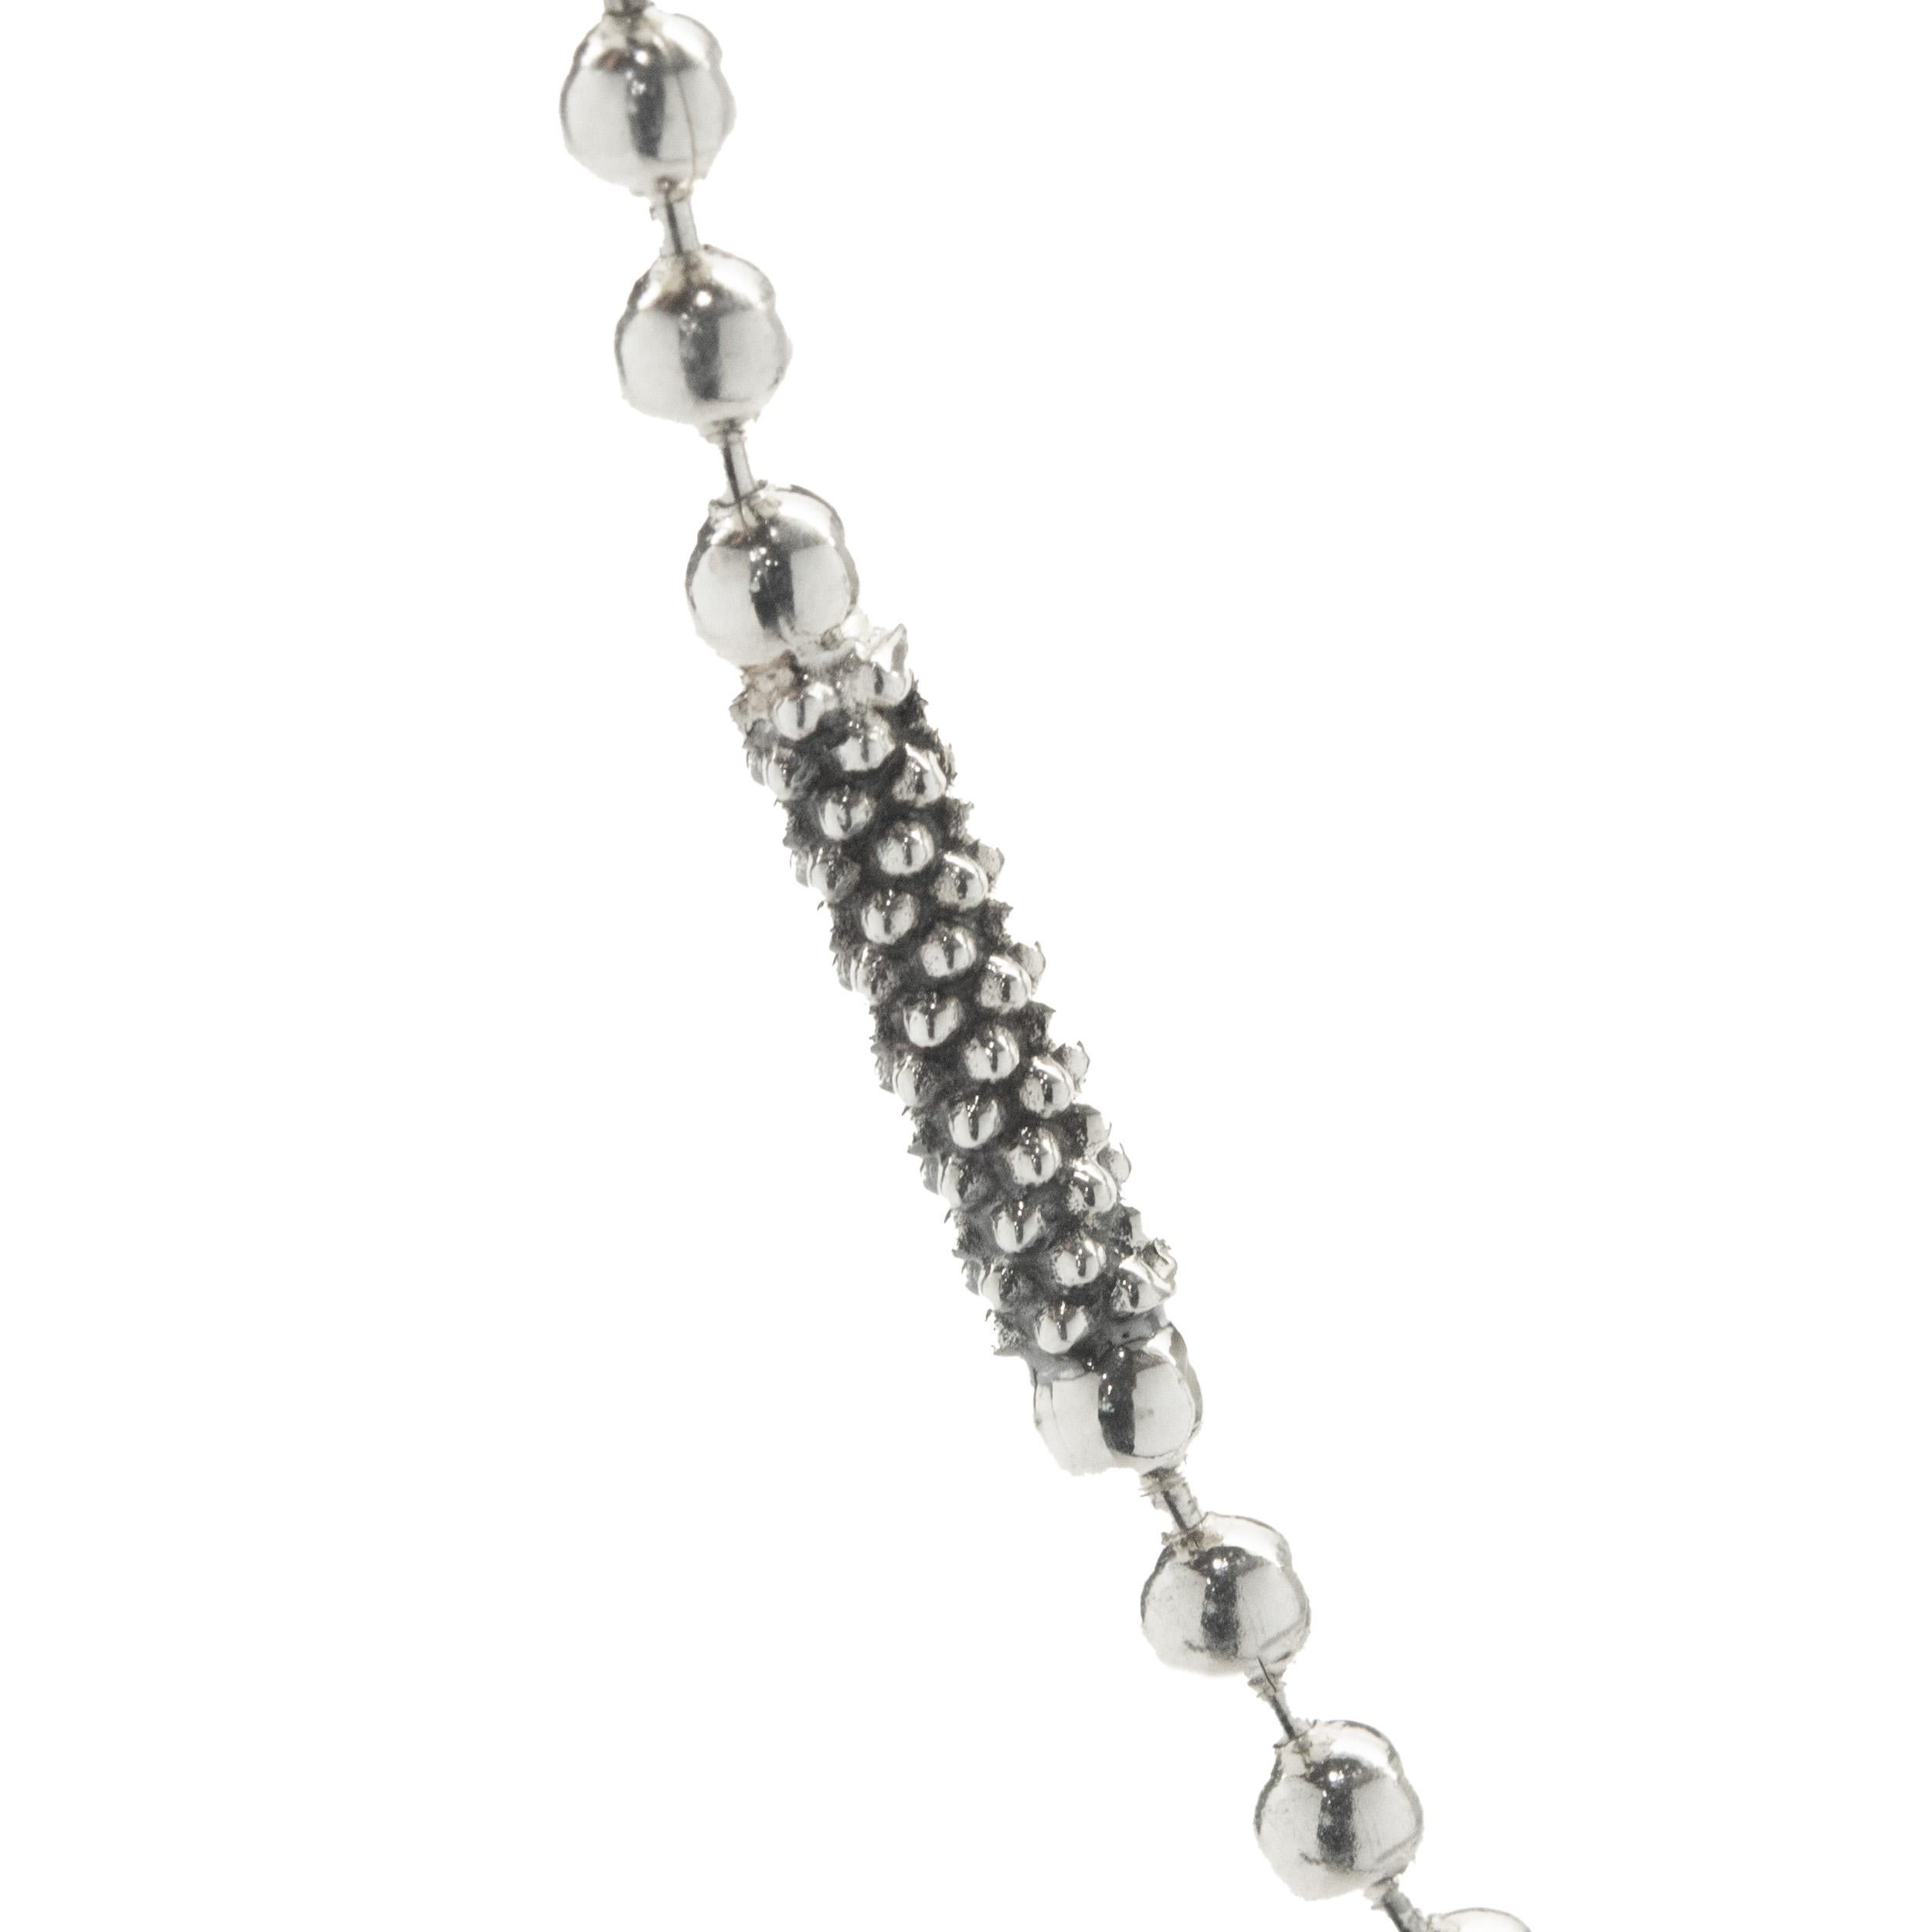 Designer: Lagos
Material: sterling silver
Weight: 11.57 grams
Dimensions: Necklace measures 18-inches